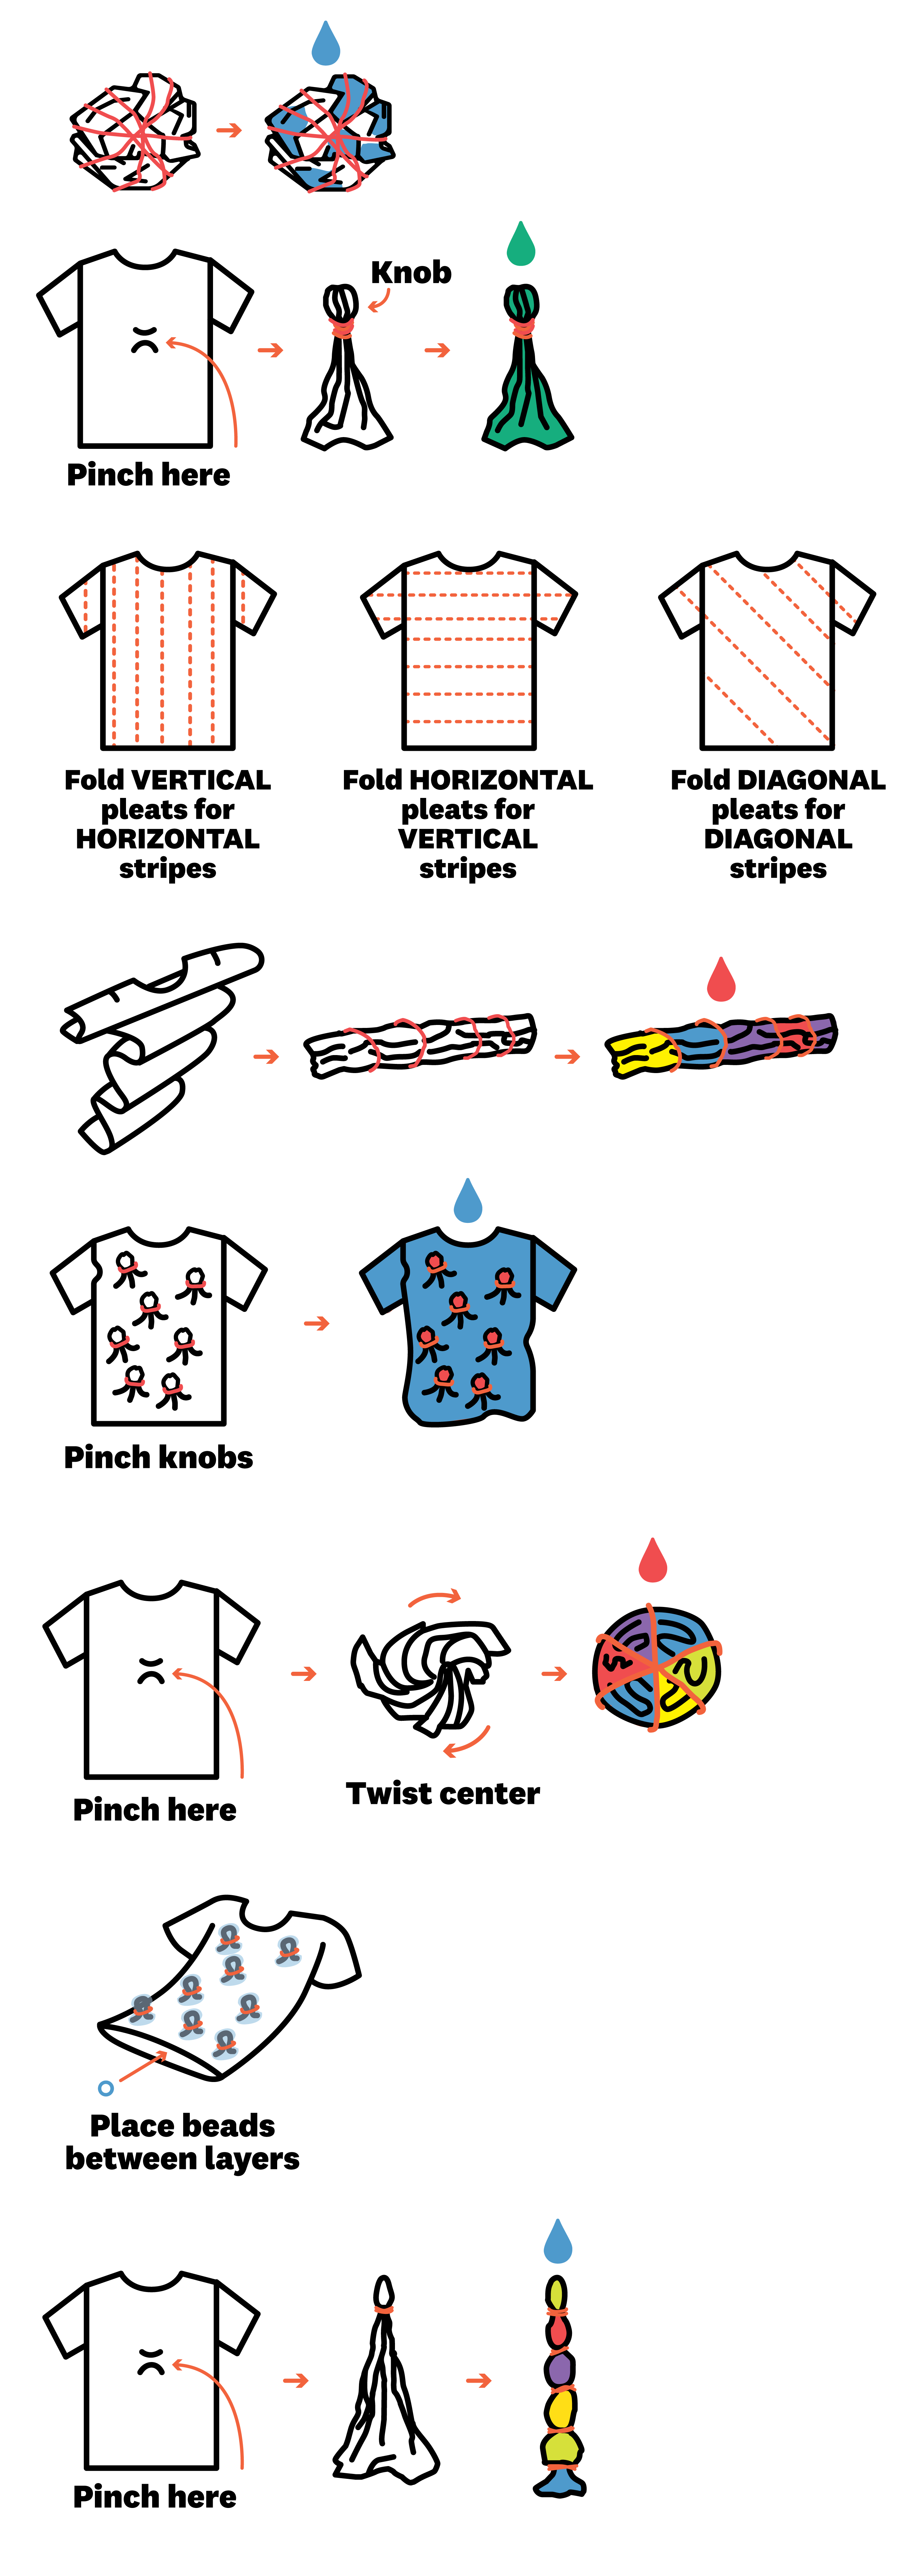 How to DYE Clothes - A simple guide - SewGuide